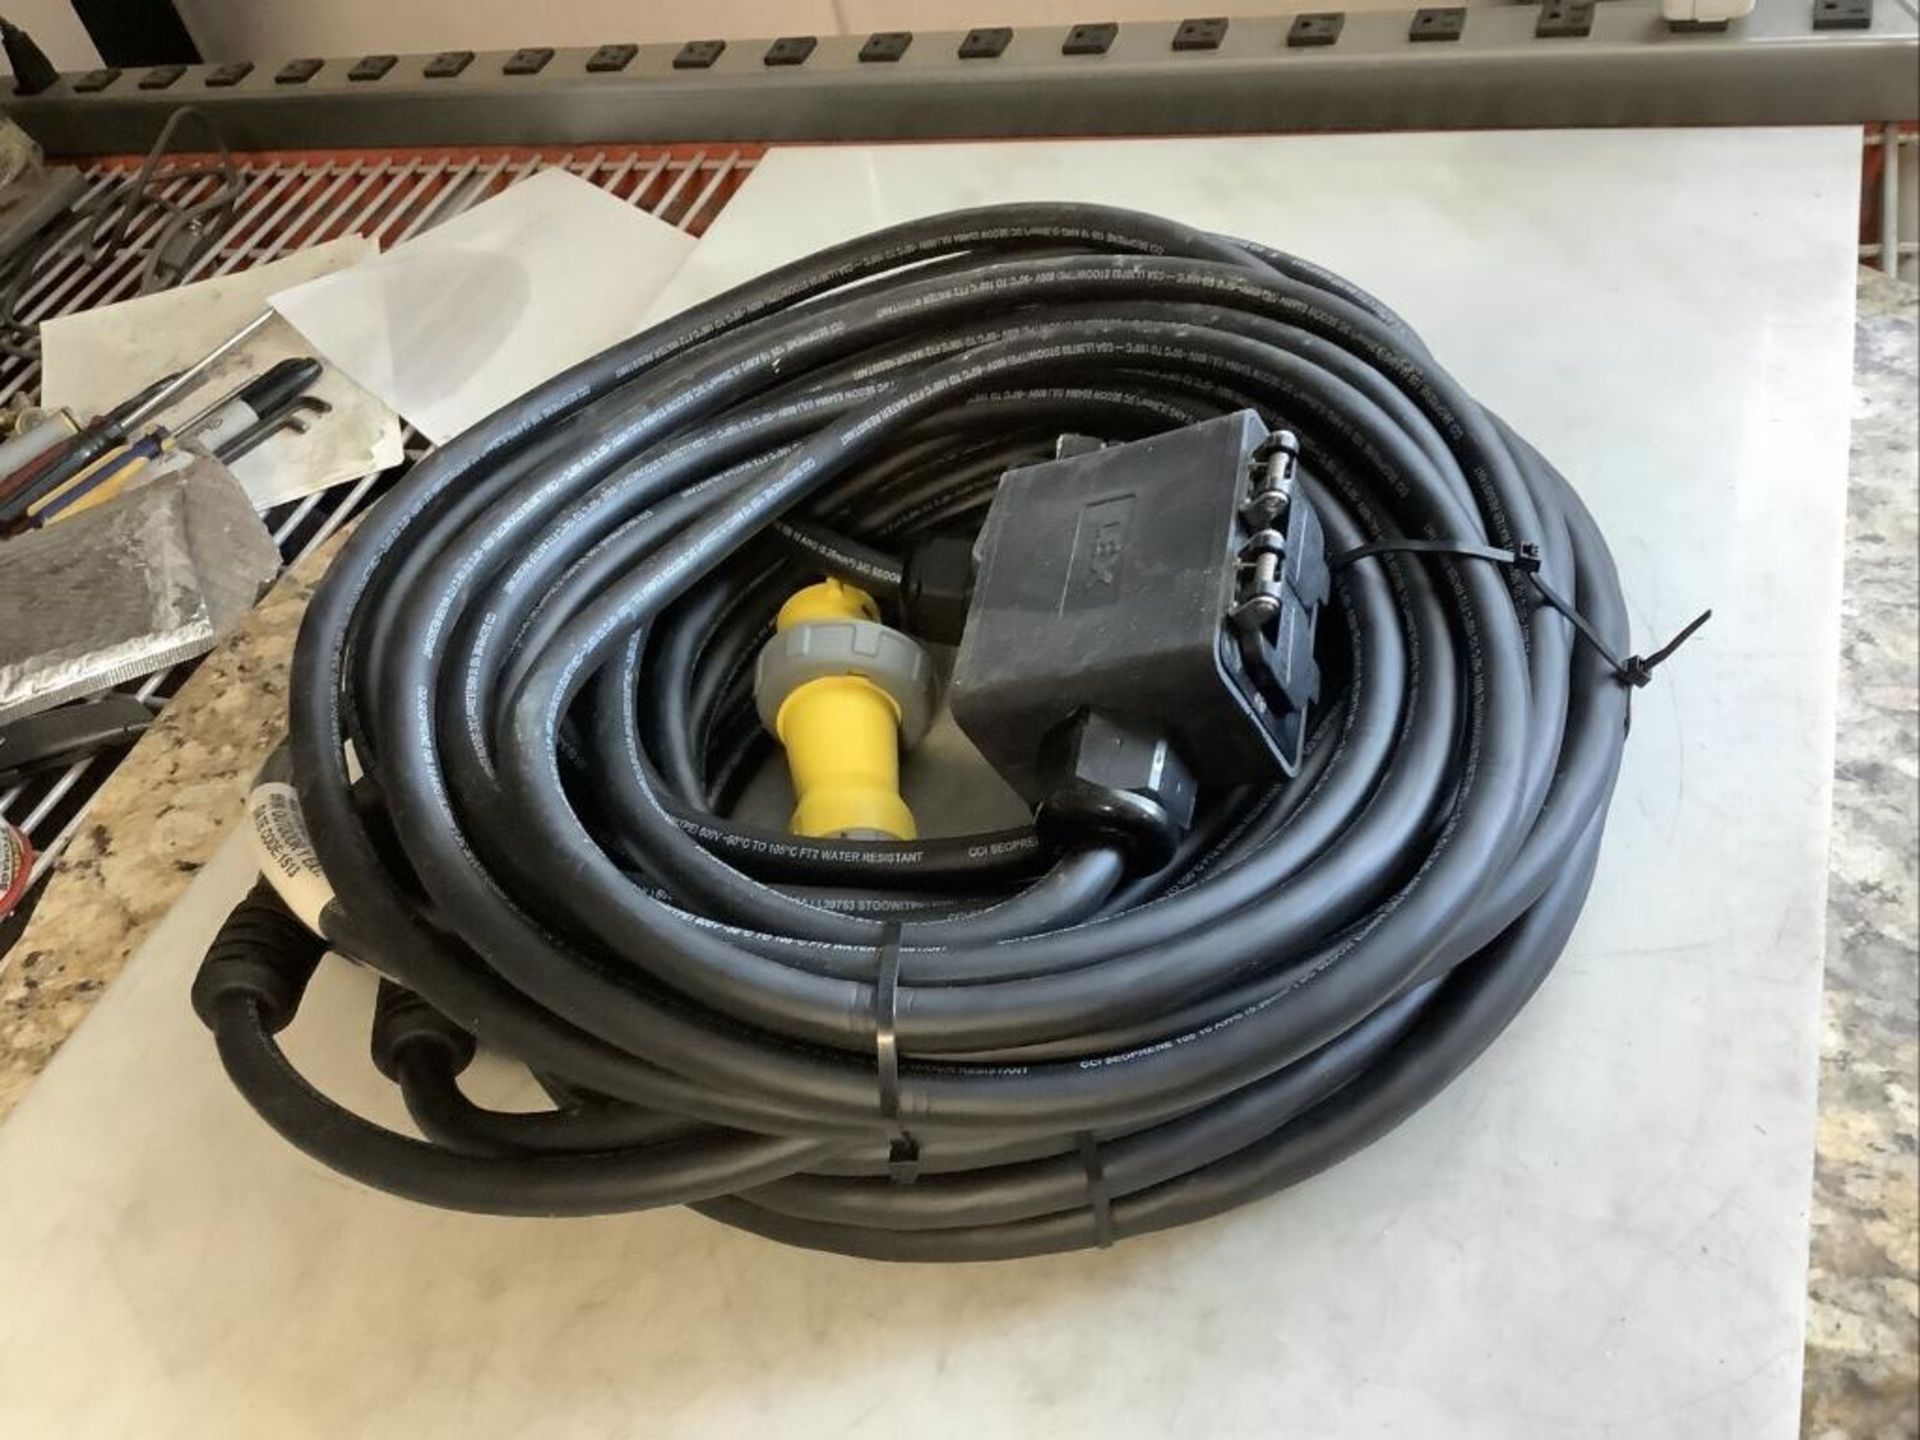 ...( 34 ) LEX 6150-01-530-7352 DB20QD50SEPS 2 Pole, 3 Wire, 20A 120V OUTDOOR CORD 50' IRP ( 18 ).... - Image 9 of 22